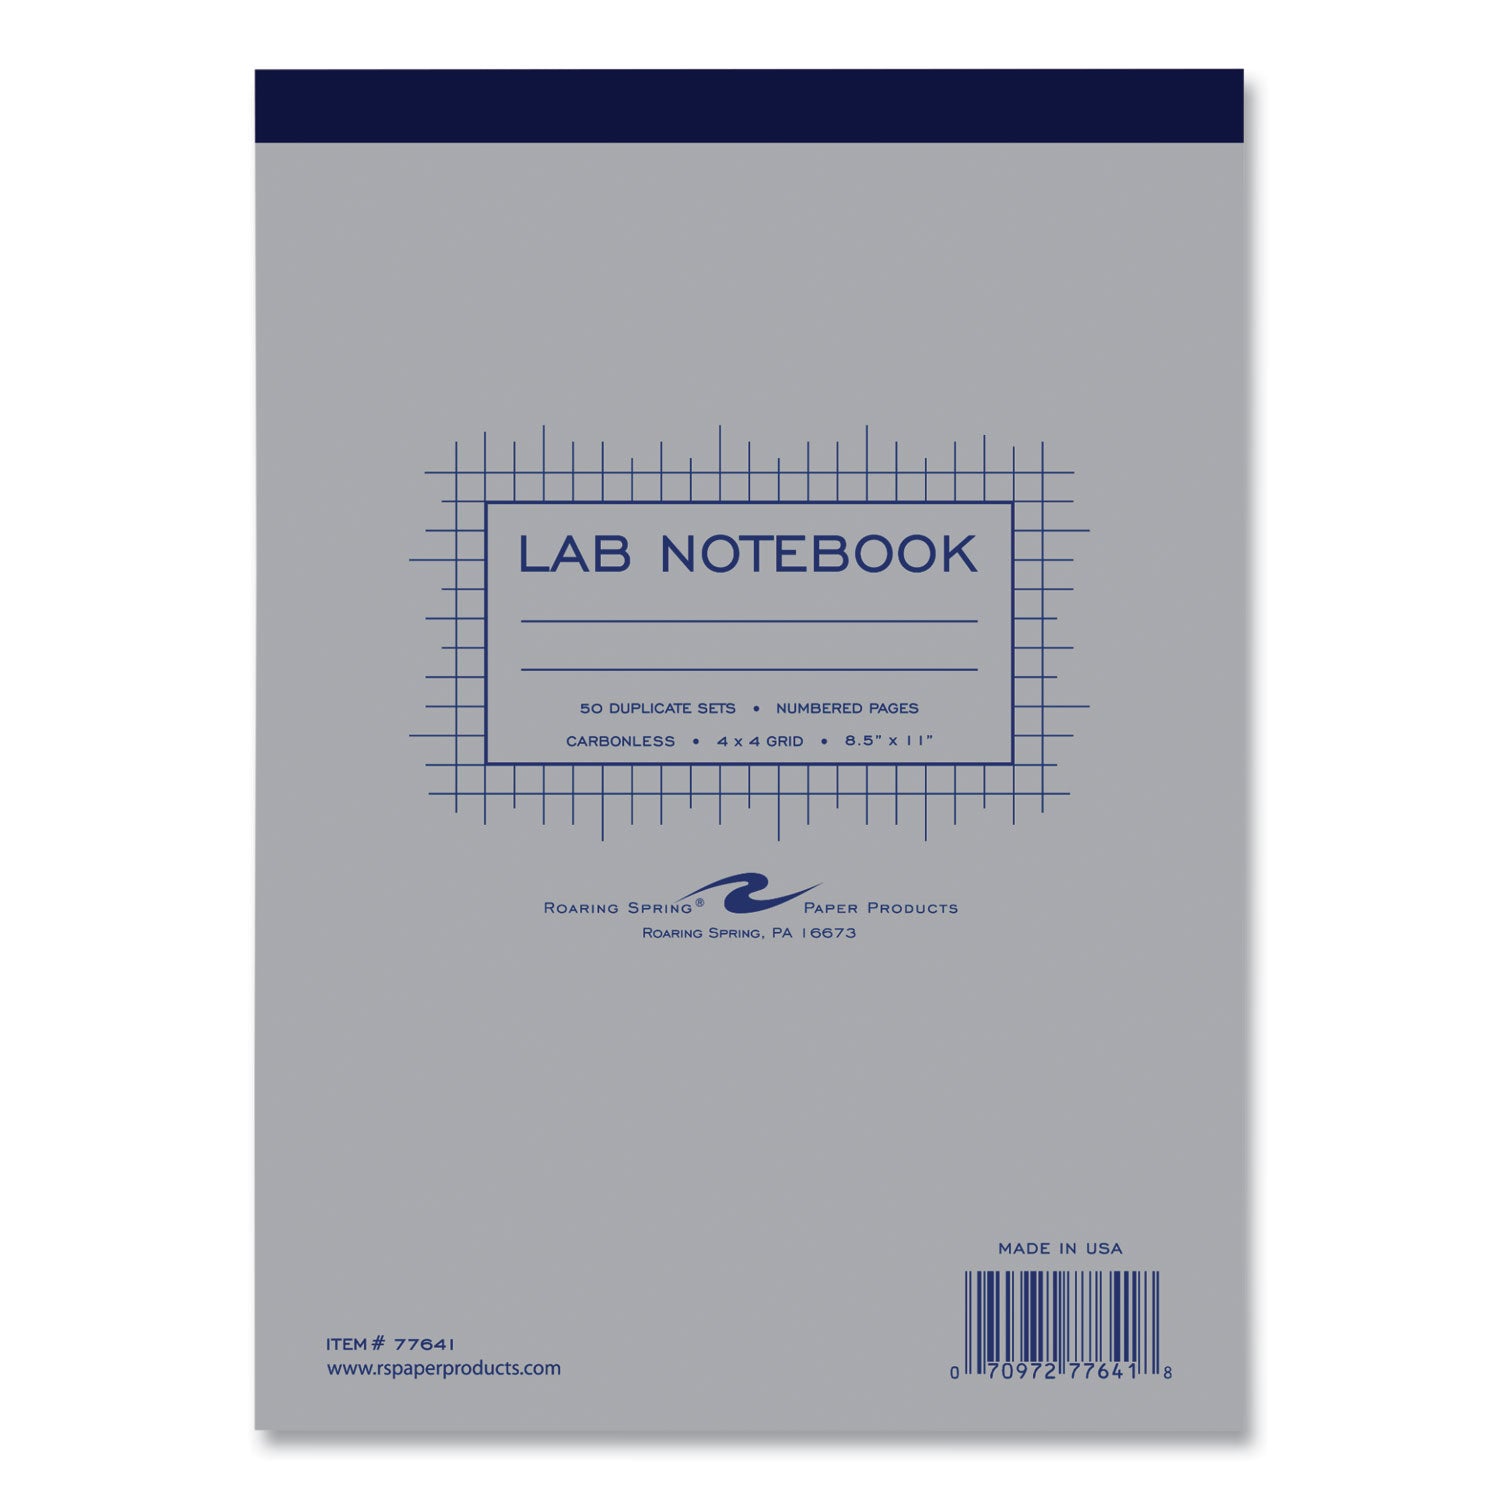 lab-and-science-carbonless-notebook-quad-rule-4-sq-in-gray-cover-100-85-x-11-sheets-24-ctships-in-4-6-business-days_roa77641cs - 2